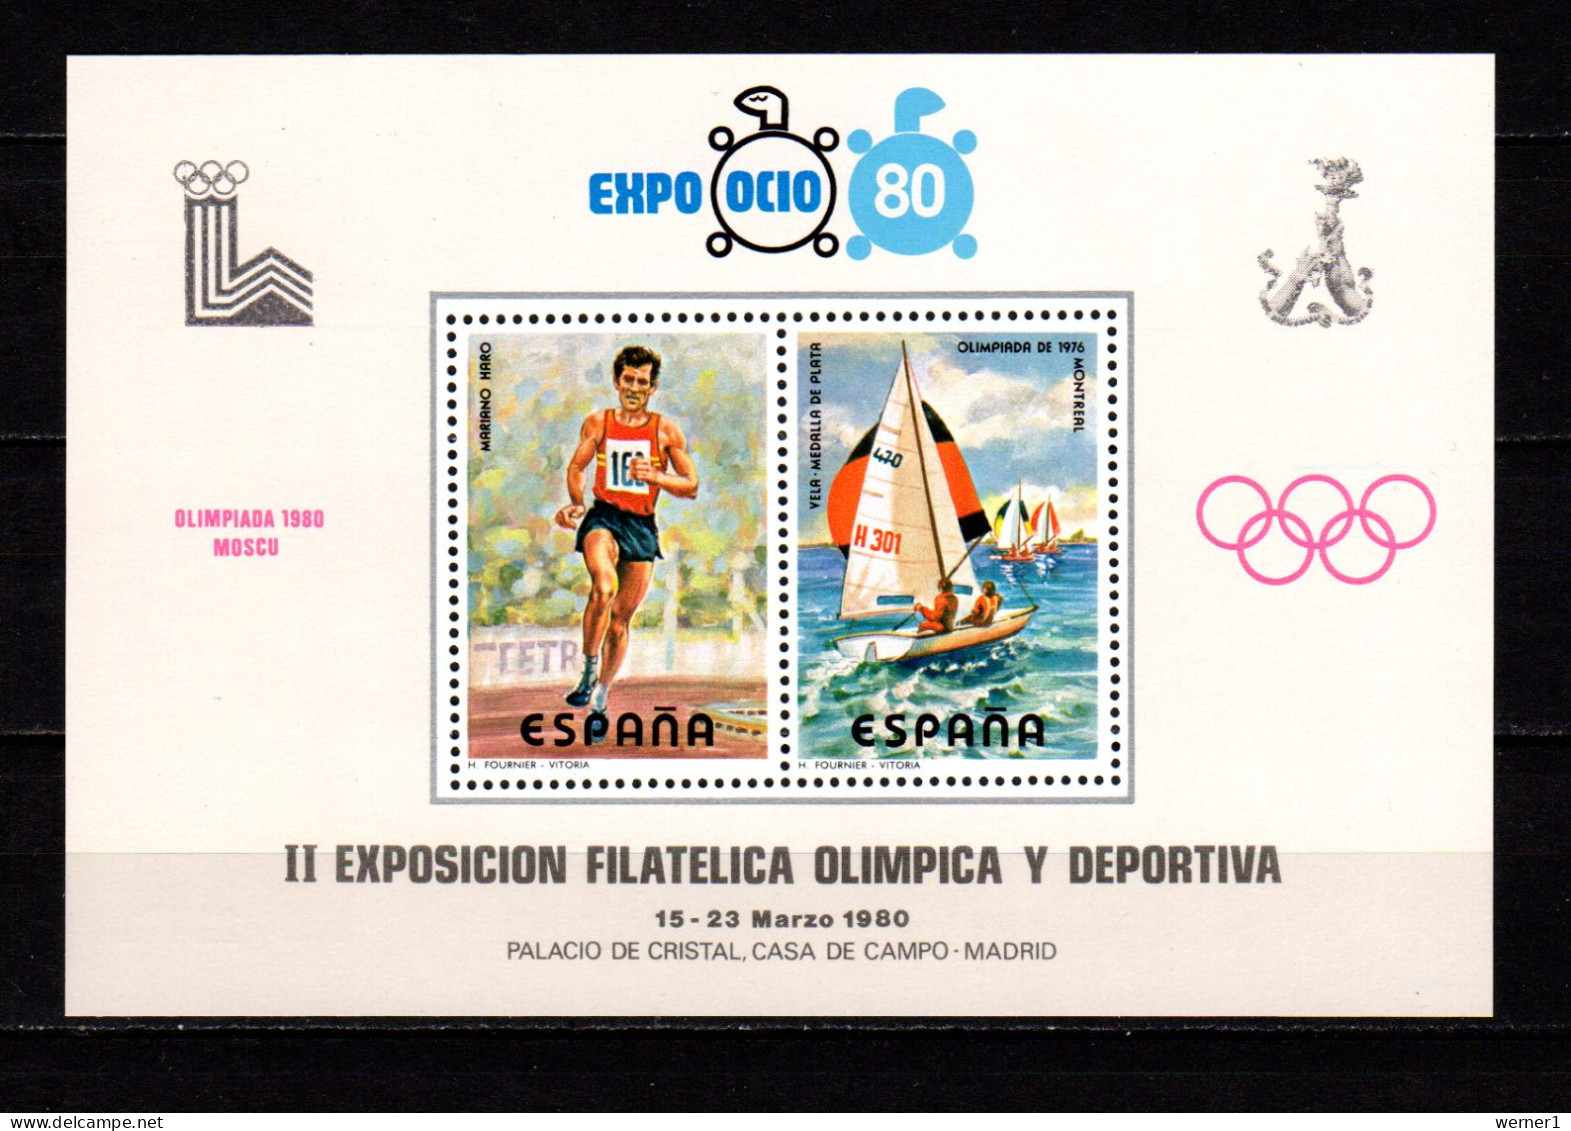 Spain 1980 Olympic Games Moscow / Lake Placid Vignette MNH -scarce- - Estate 1980: Mosca